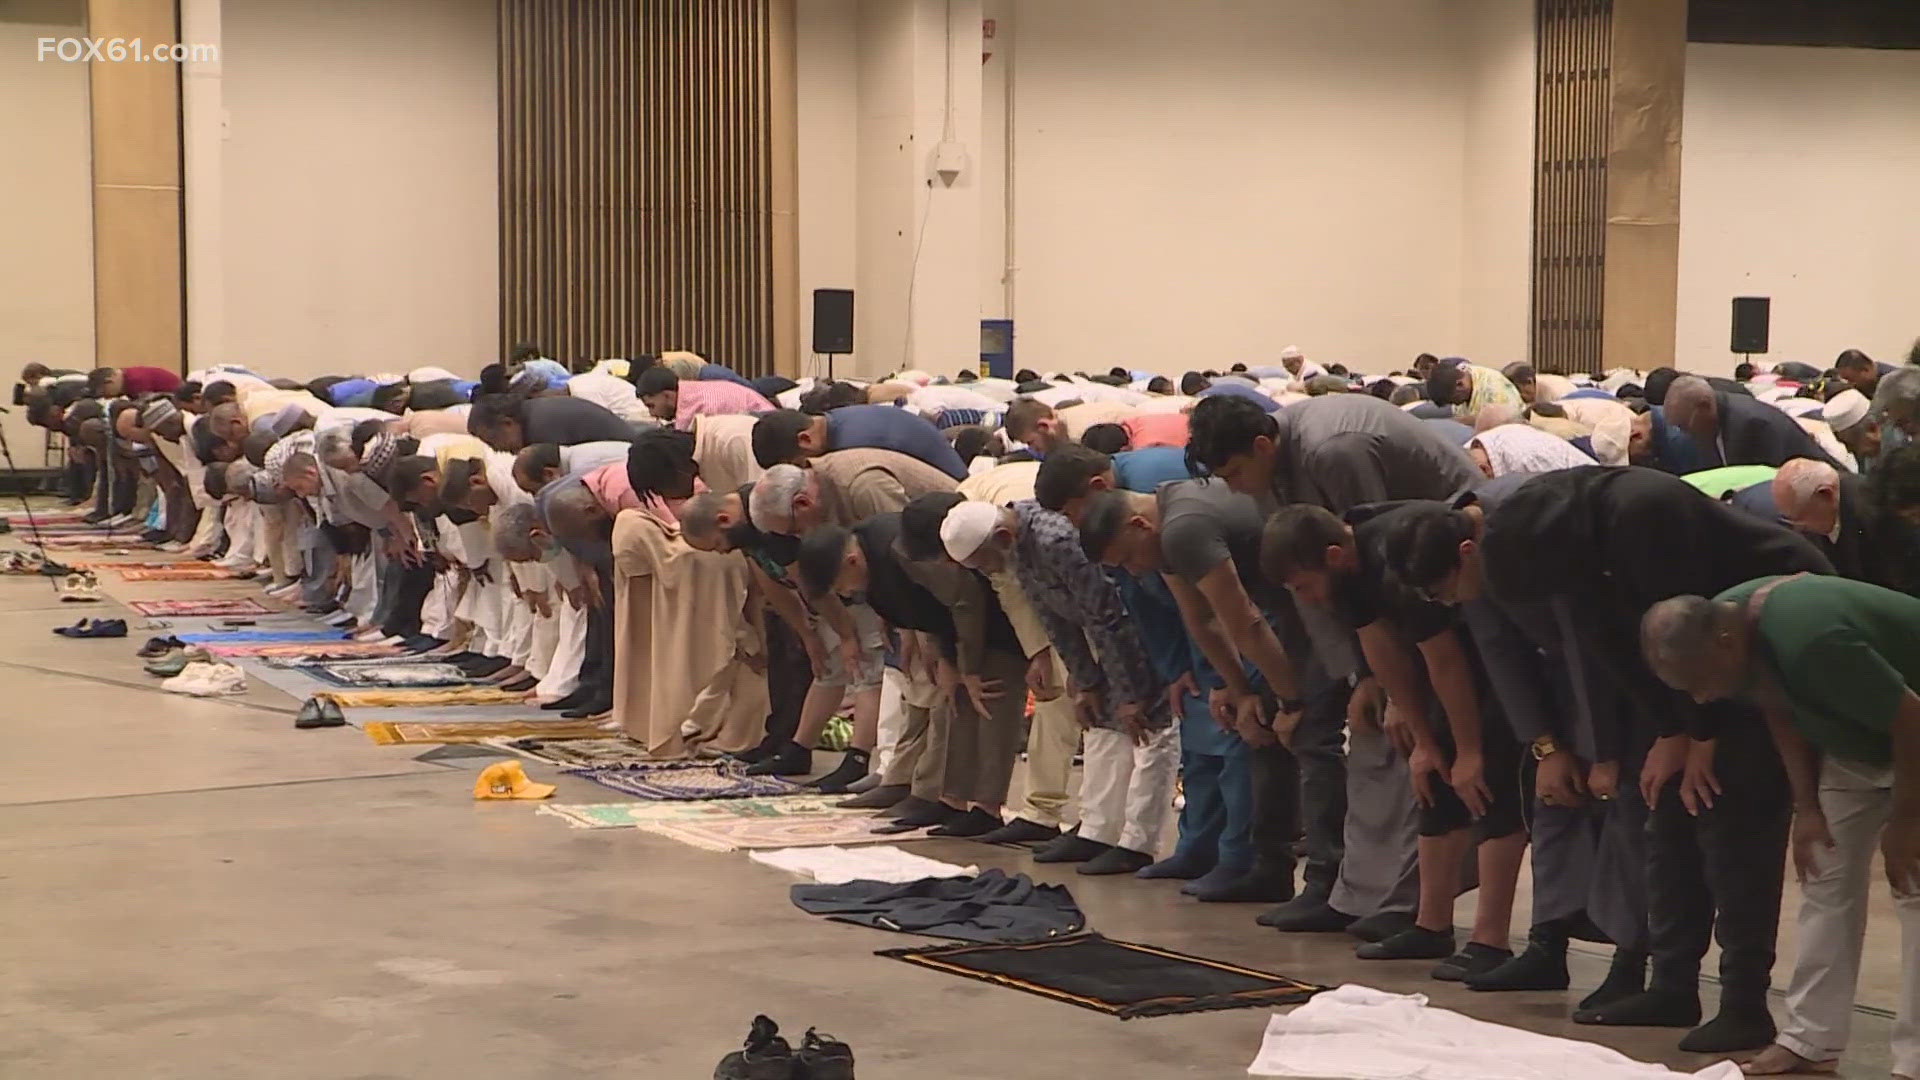 Thousands of Muslims celebrated Eid al-Adha with communal prayer at the XL Center in Hartford Sunday.